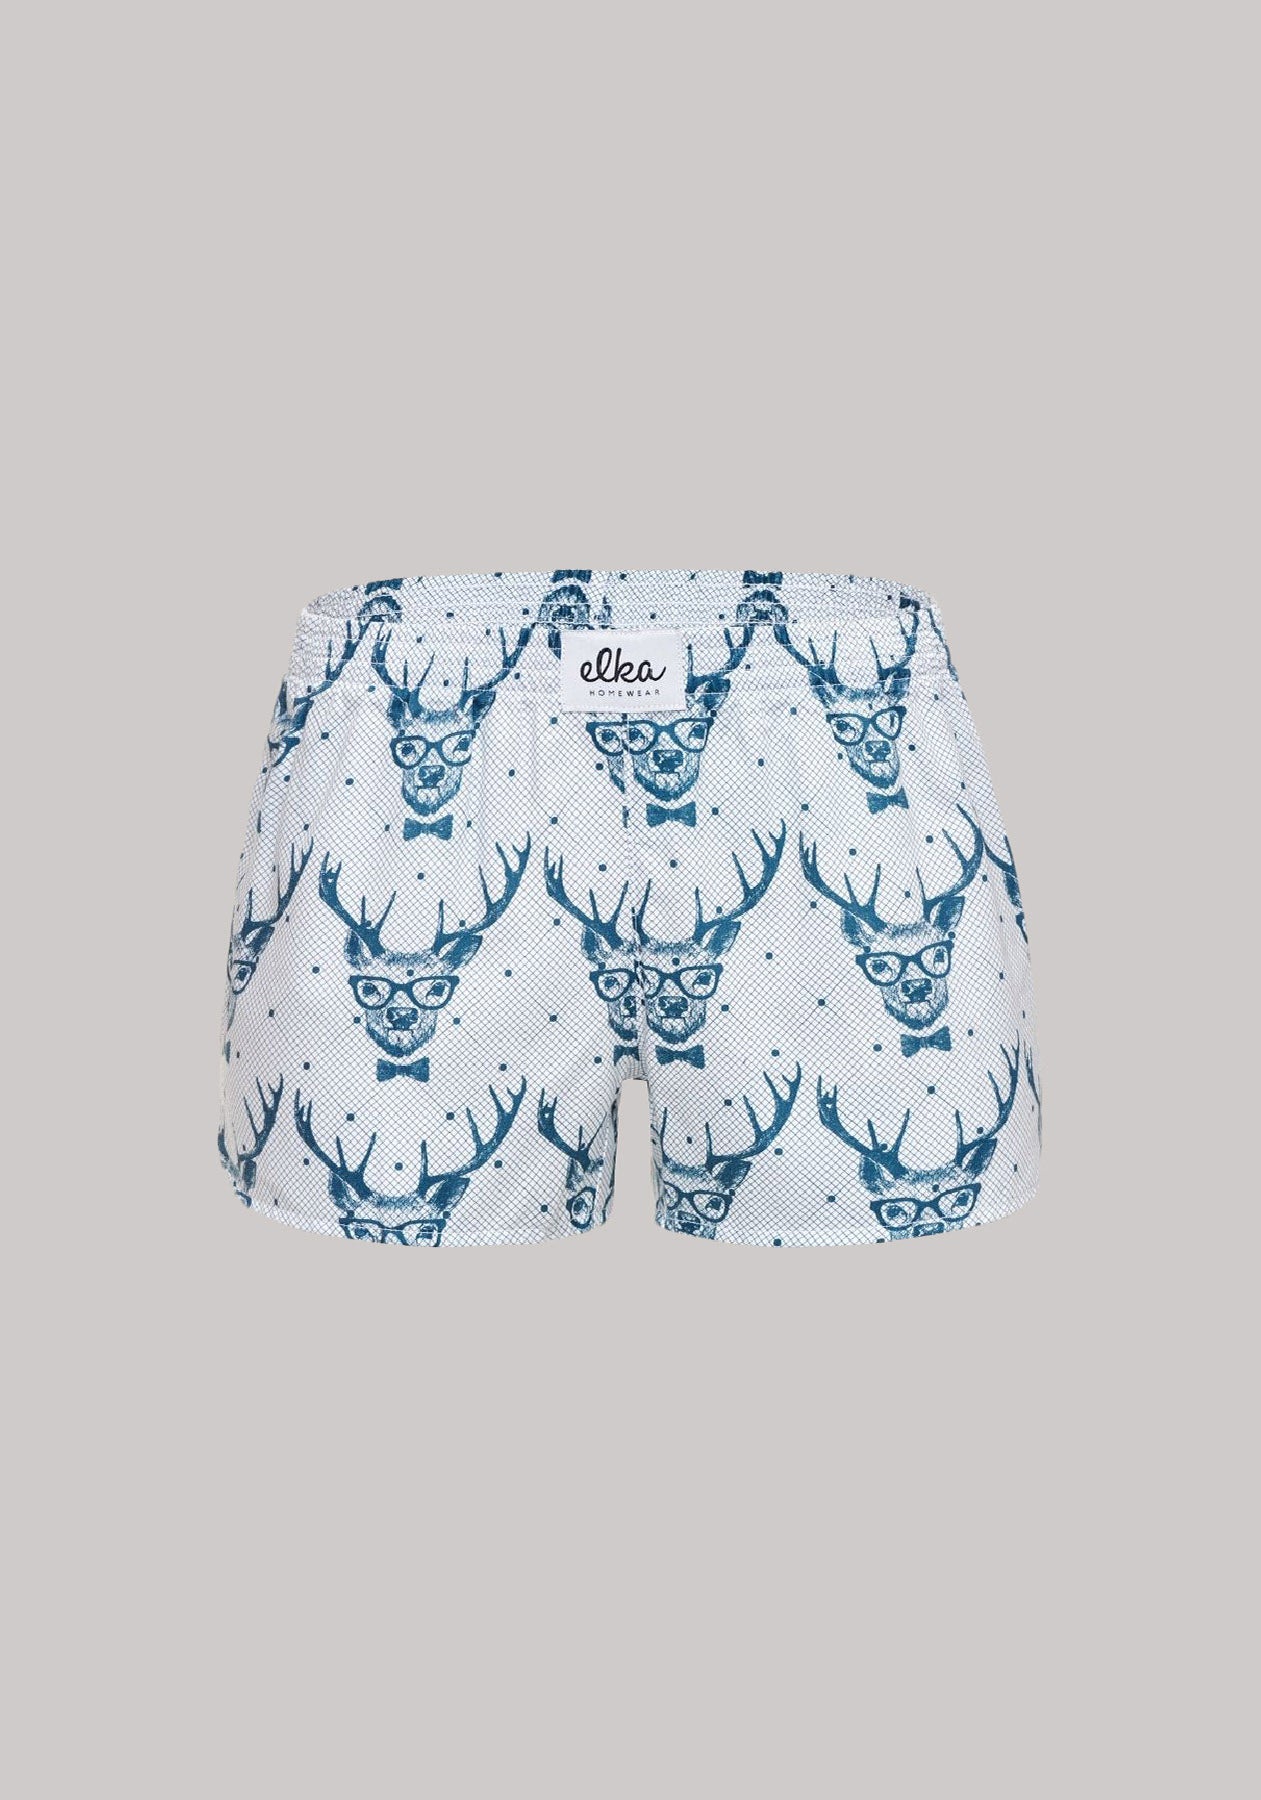 Women's shorts Deers with glasses